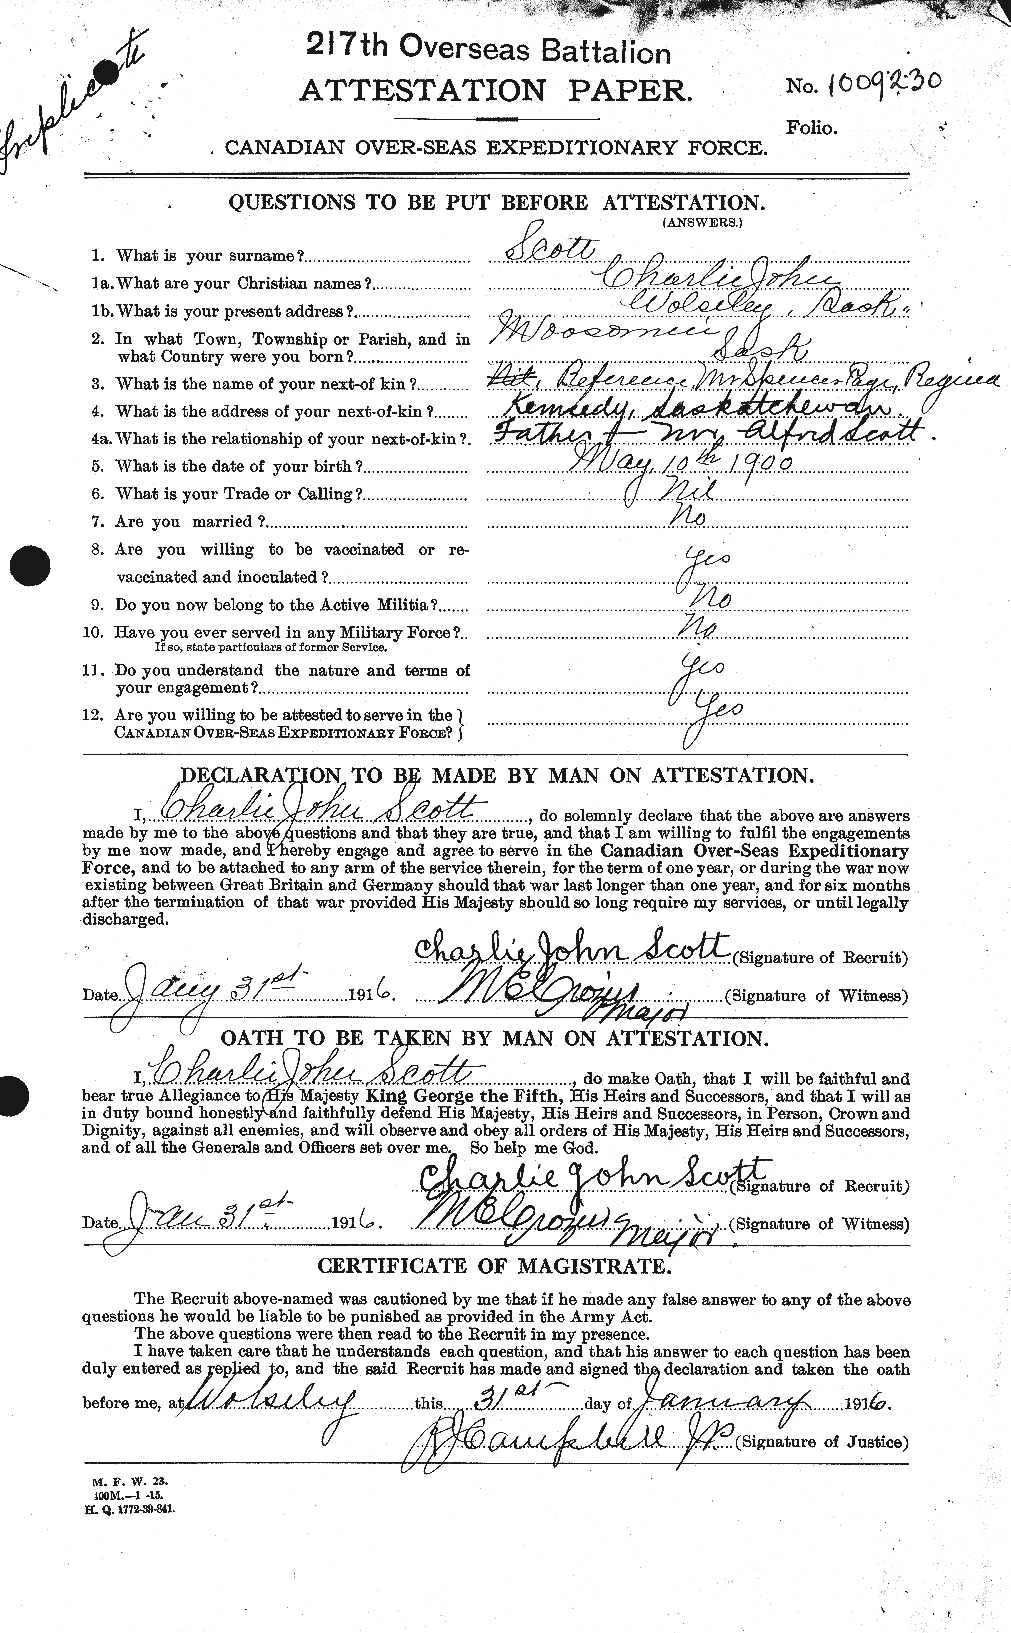 Personnel Records of the First World War - CEF 085868a